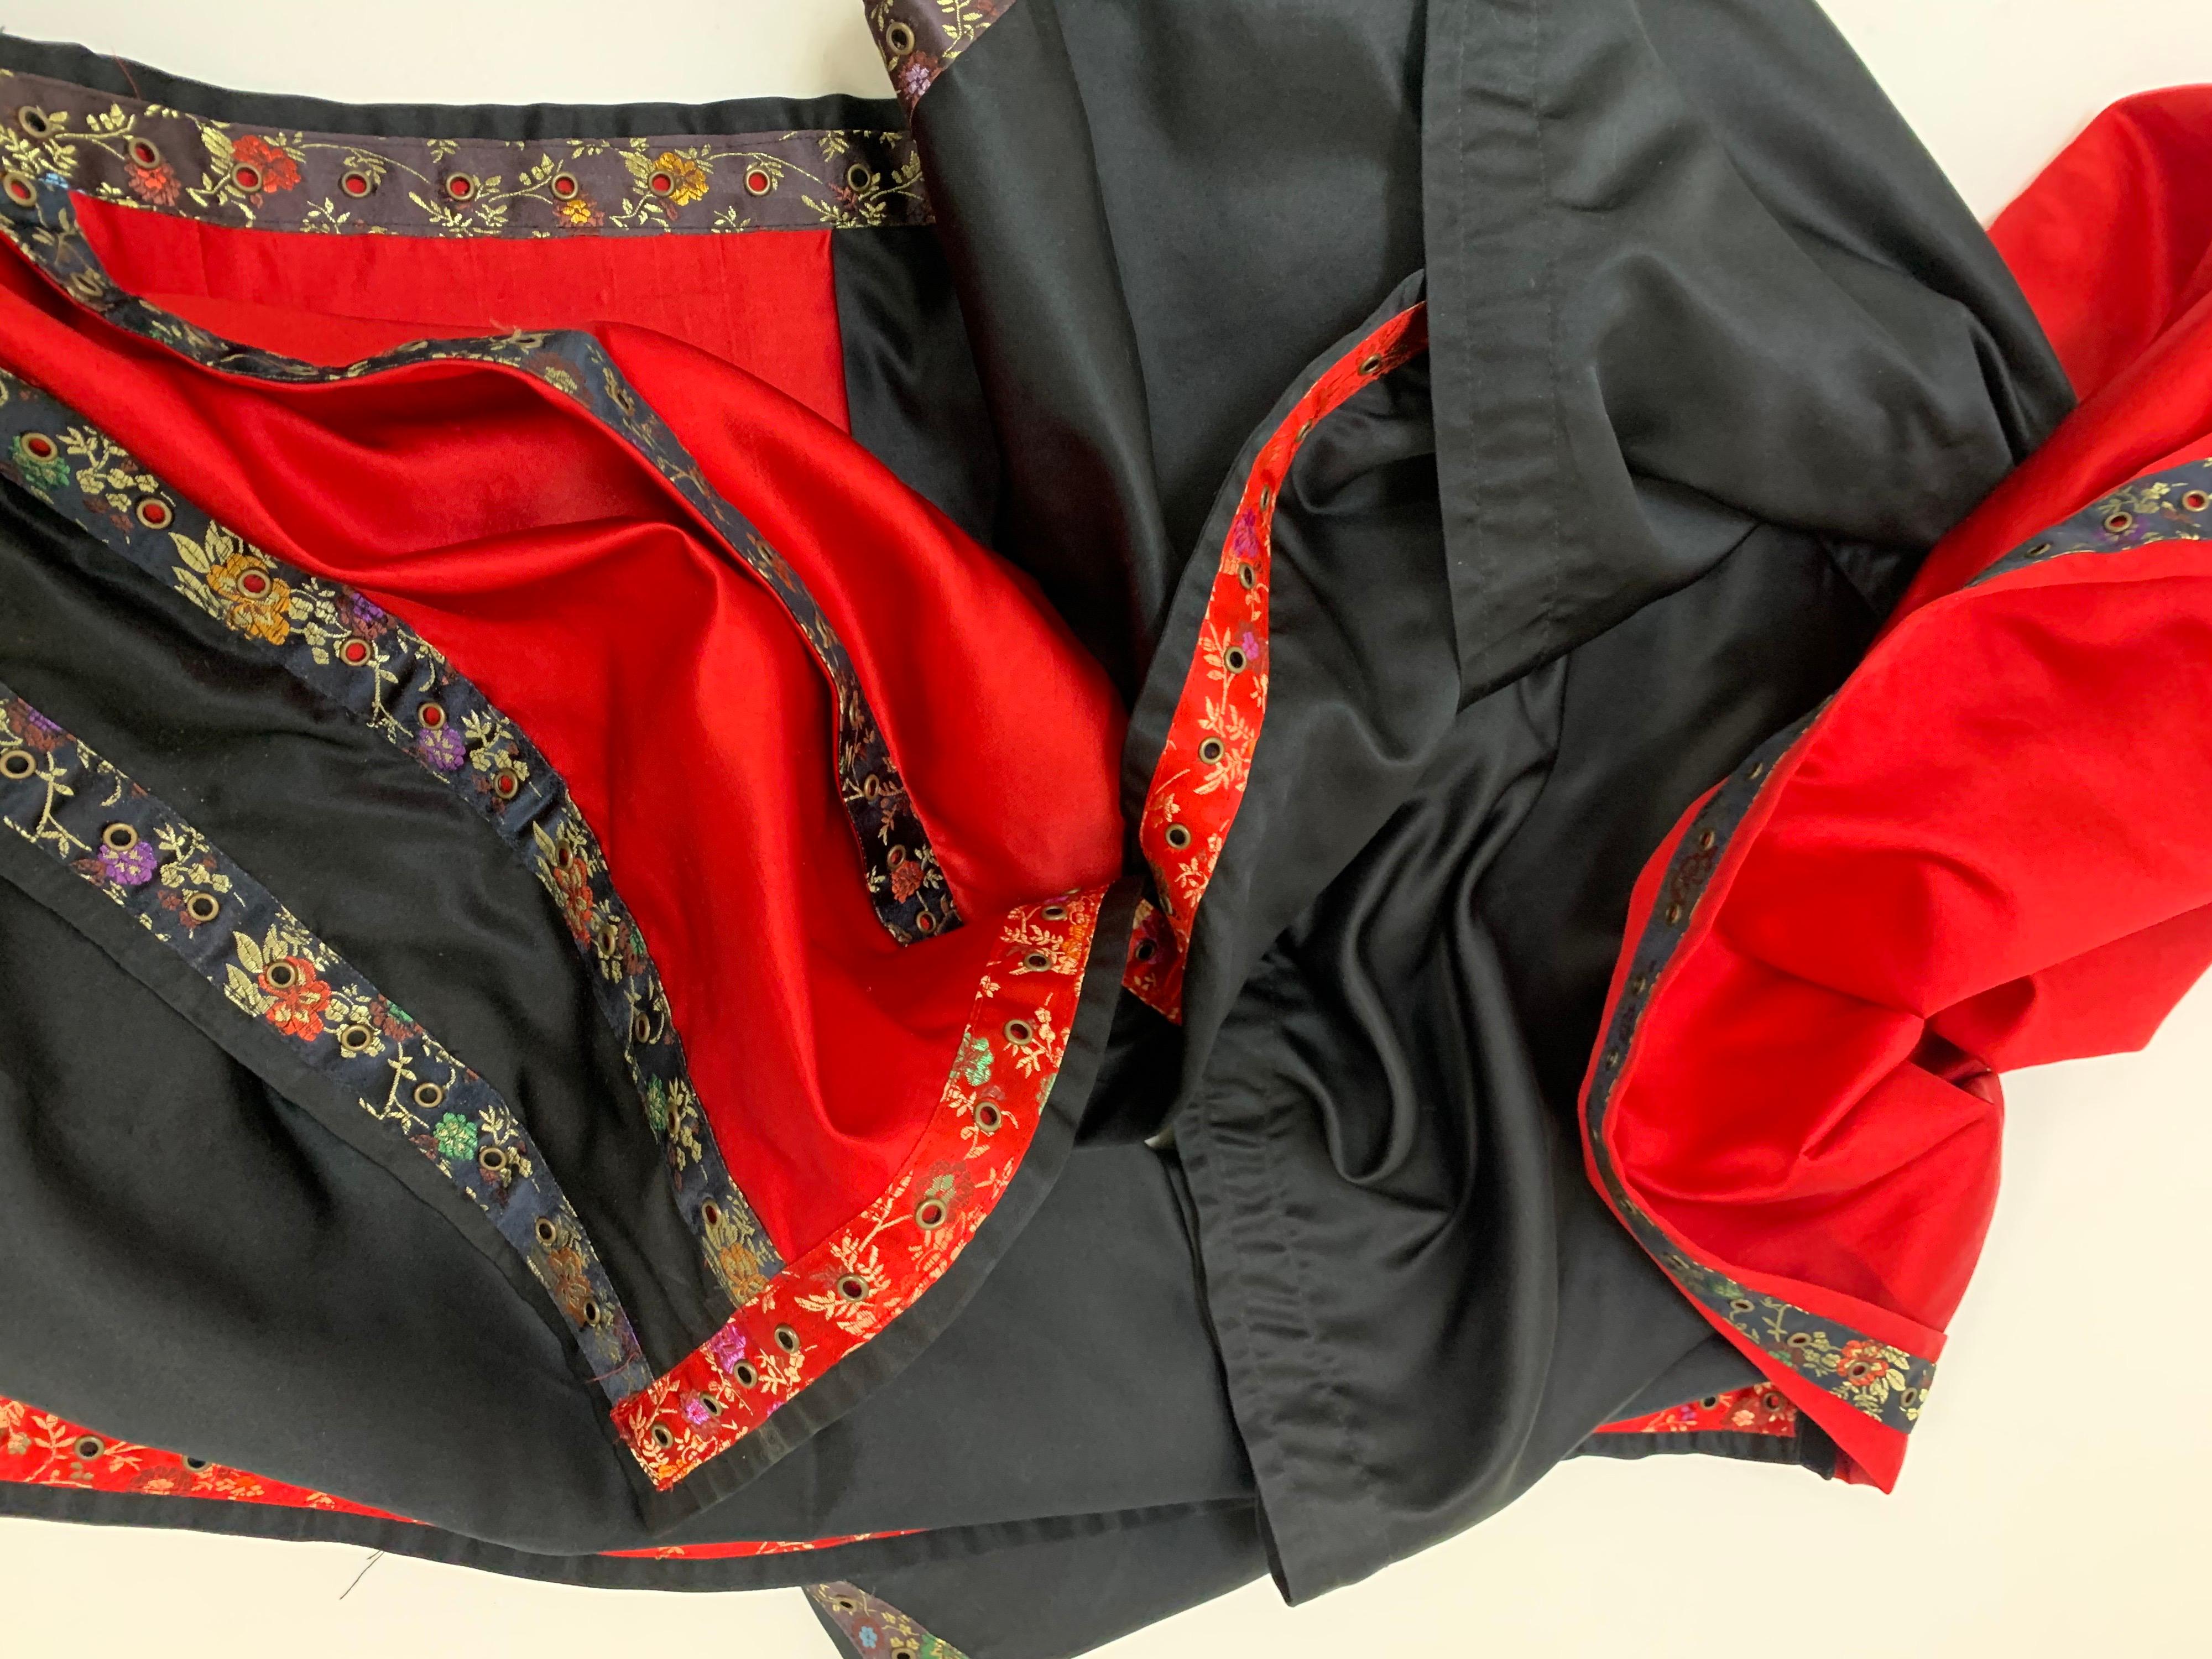 Torso Creations Black & Red Silk Satin Hooded Wrap Stole Trimmed In Brocade Tape For Sale 5